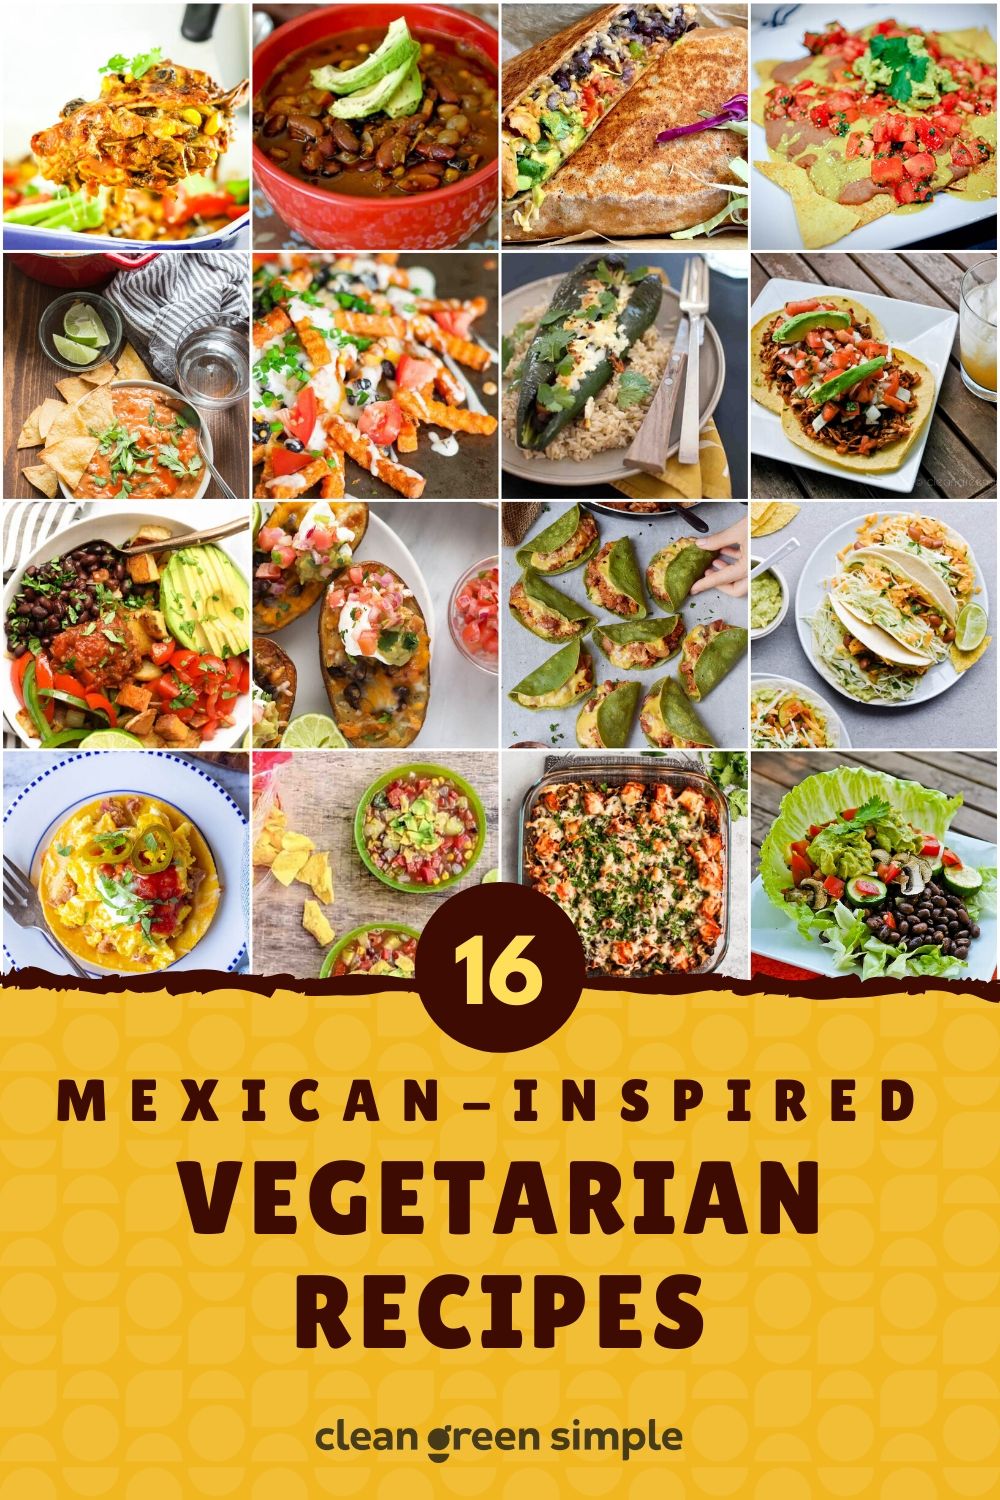 16 Delicious Vegetarian Mexican-Inspired Recipes You'll Love | Clean